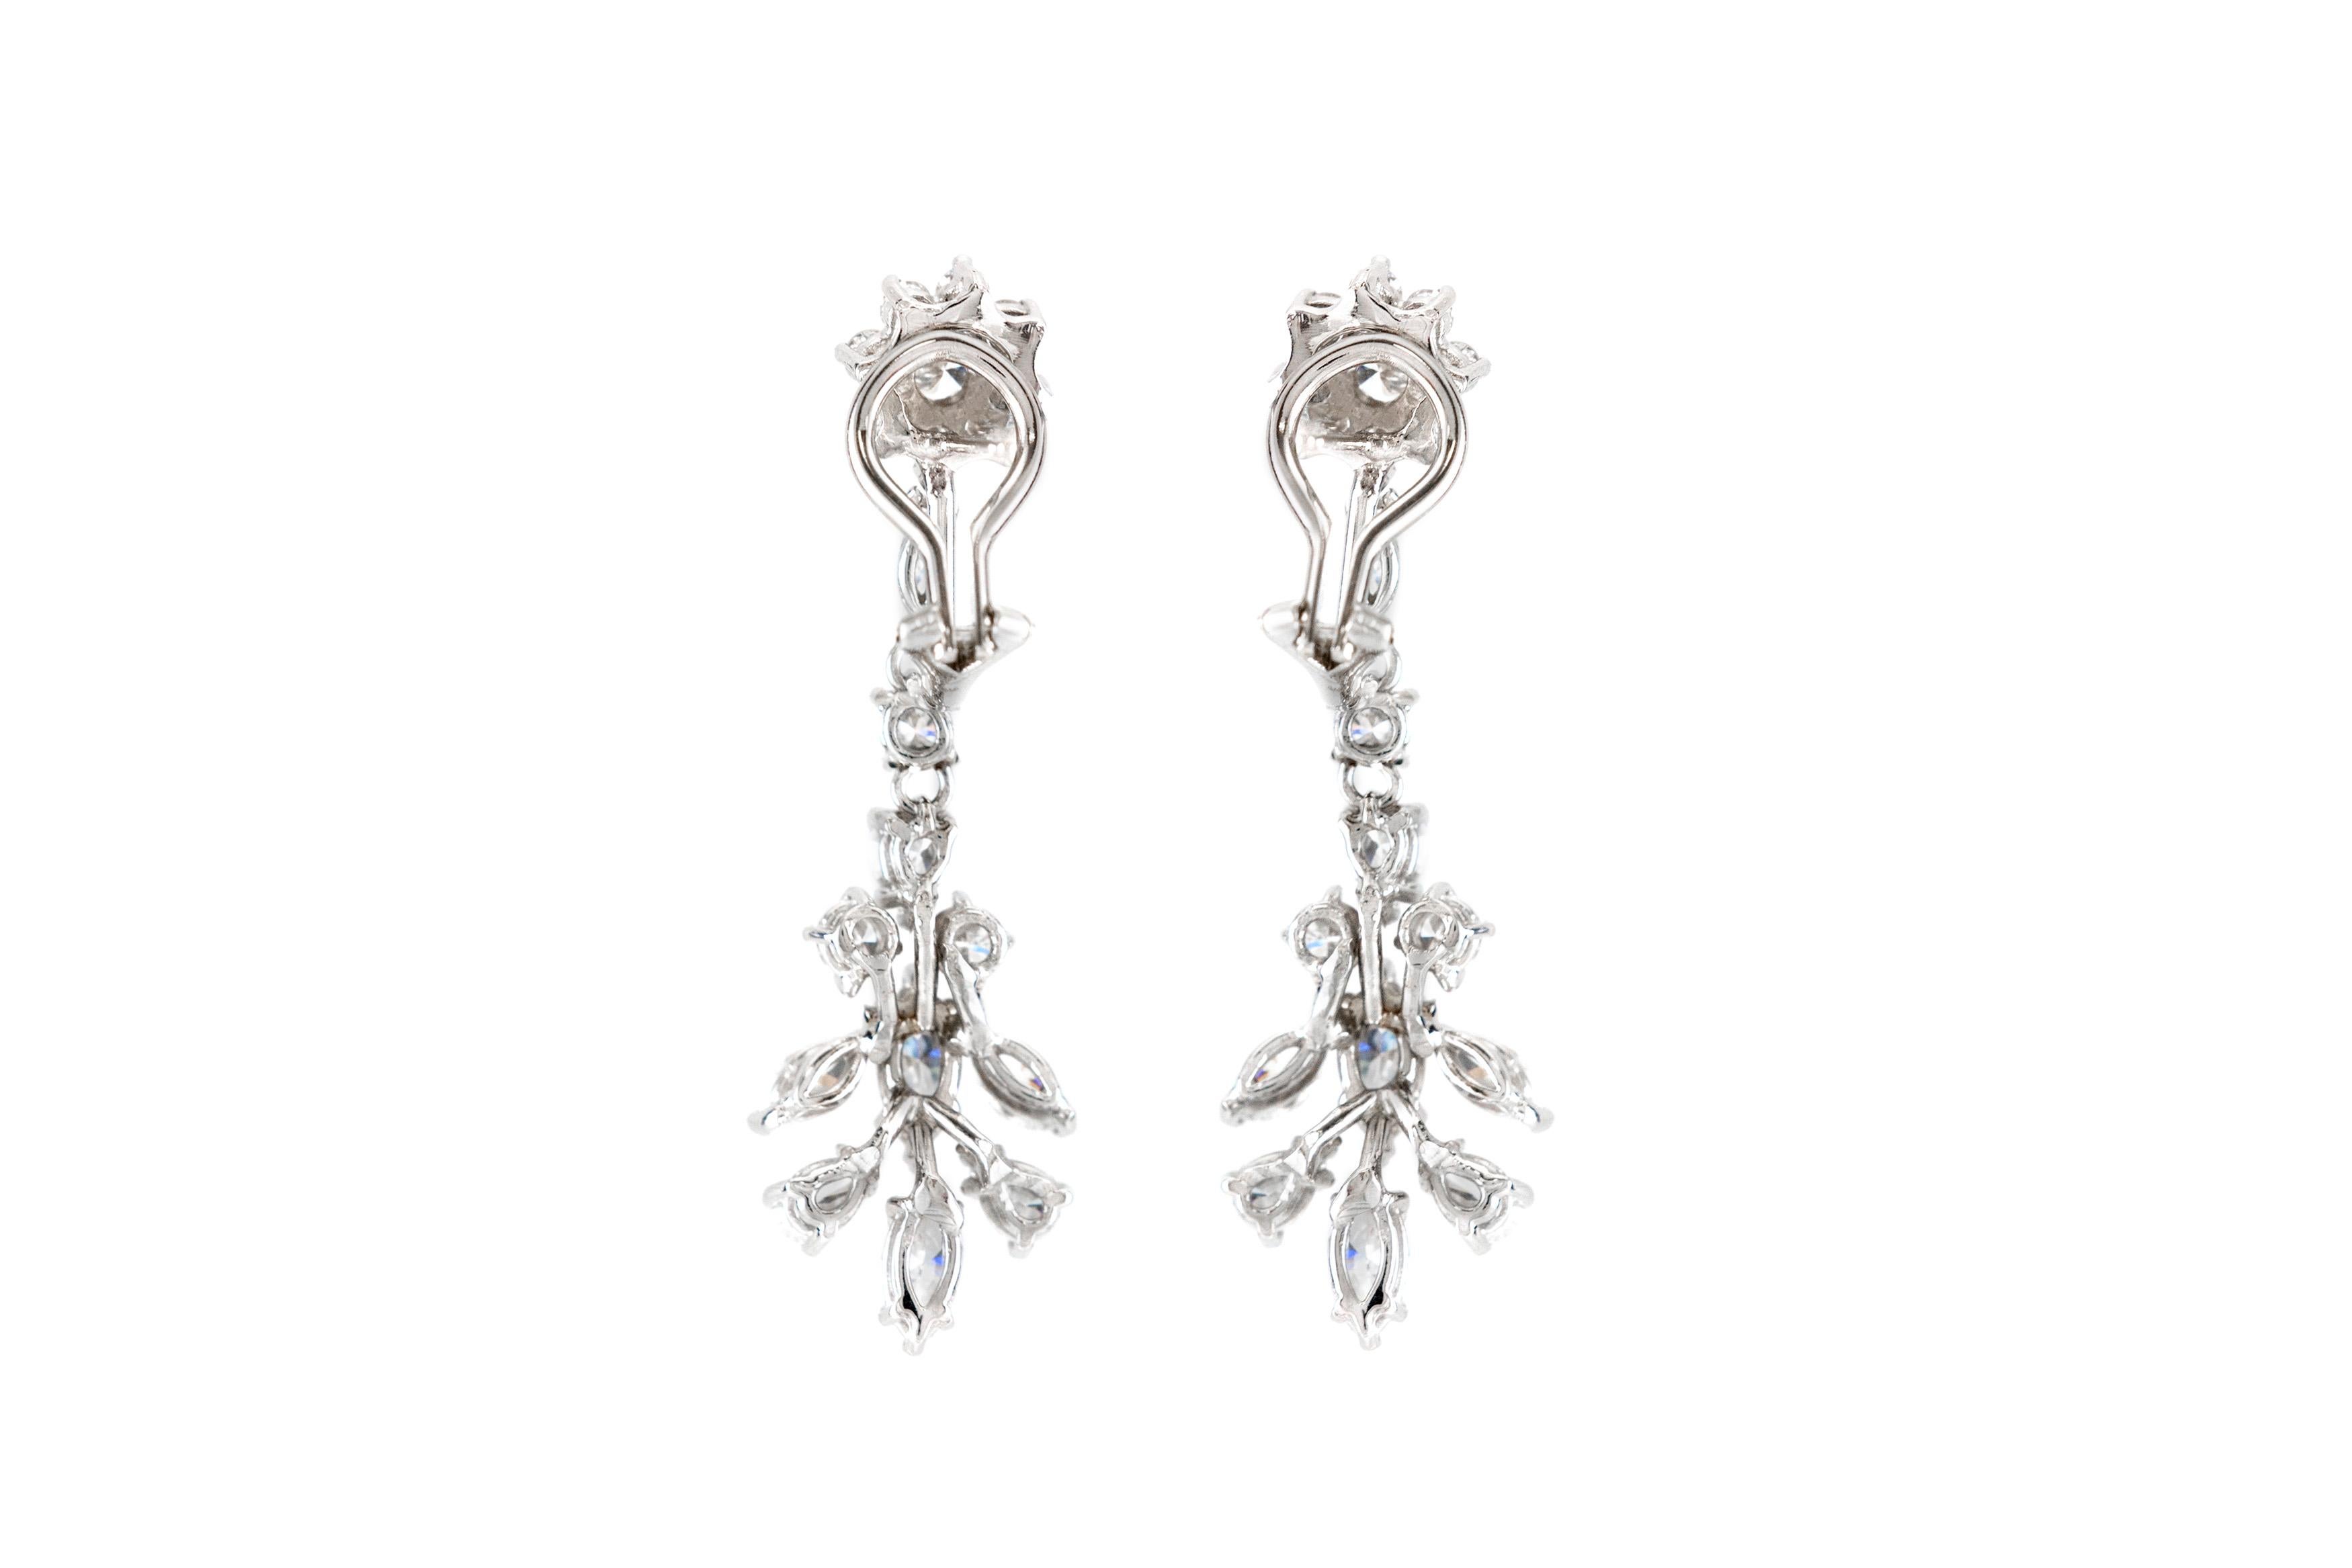 The earrings is finely crafted in 14k and 18k white gold with different dimamonds cut weighing approximately total of 5.00 carat,
Color G H
Clarity VS